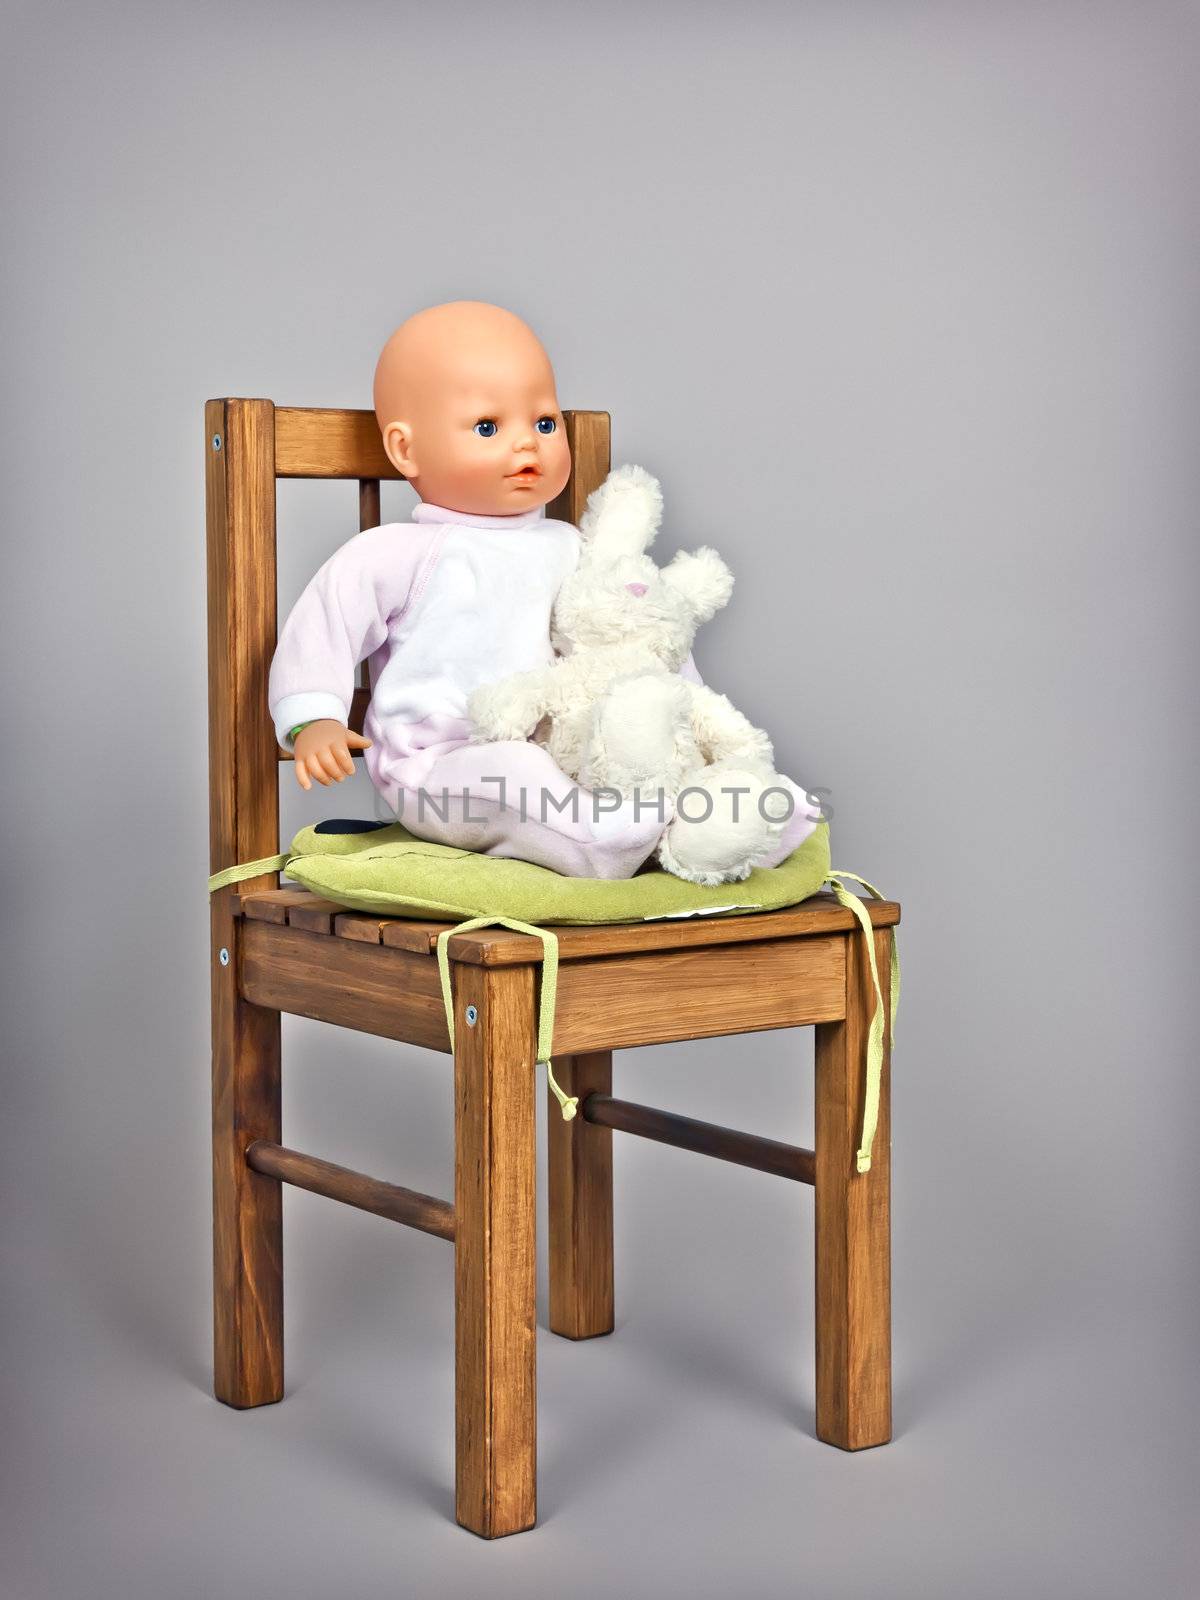 An image of a baby puppet on a chair